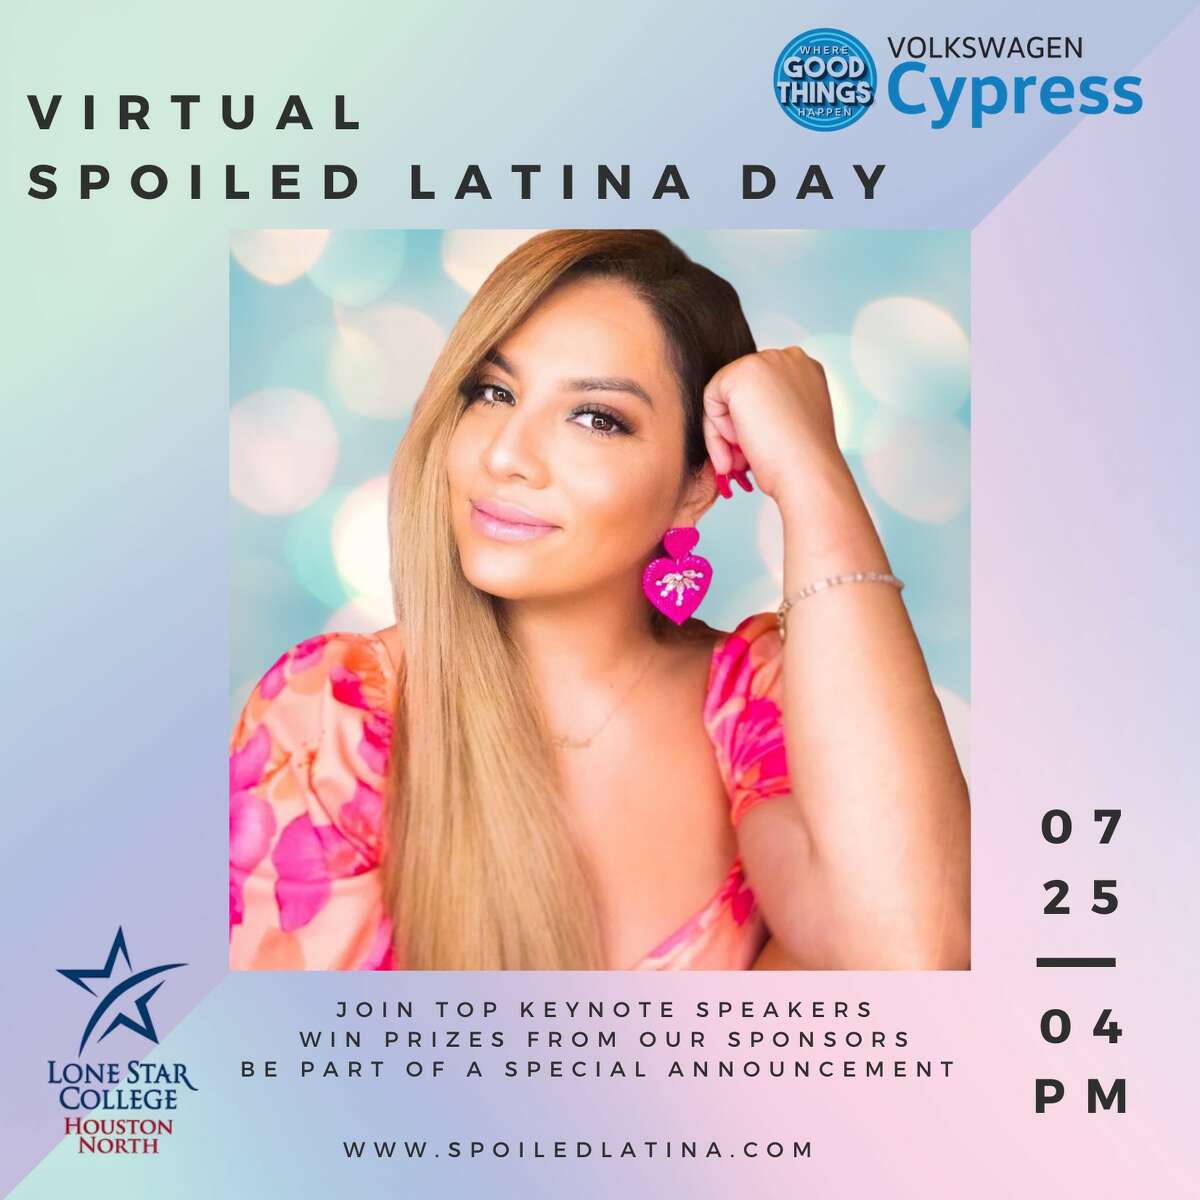 'Spoiled Latina Day' encourages women to spoil themselves in business, life